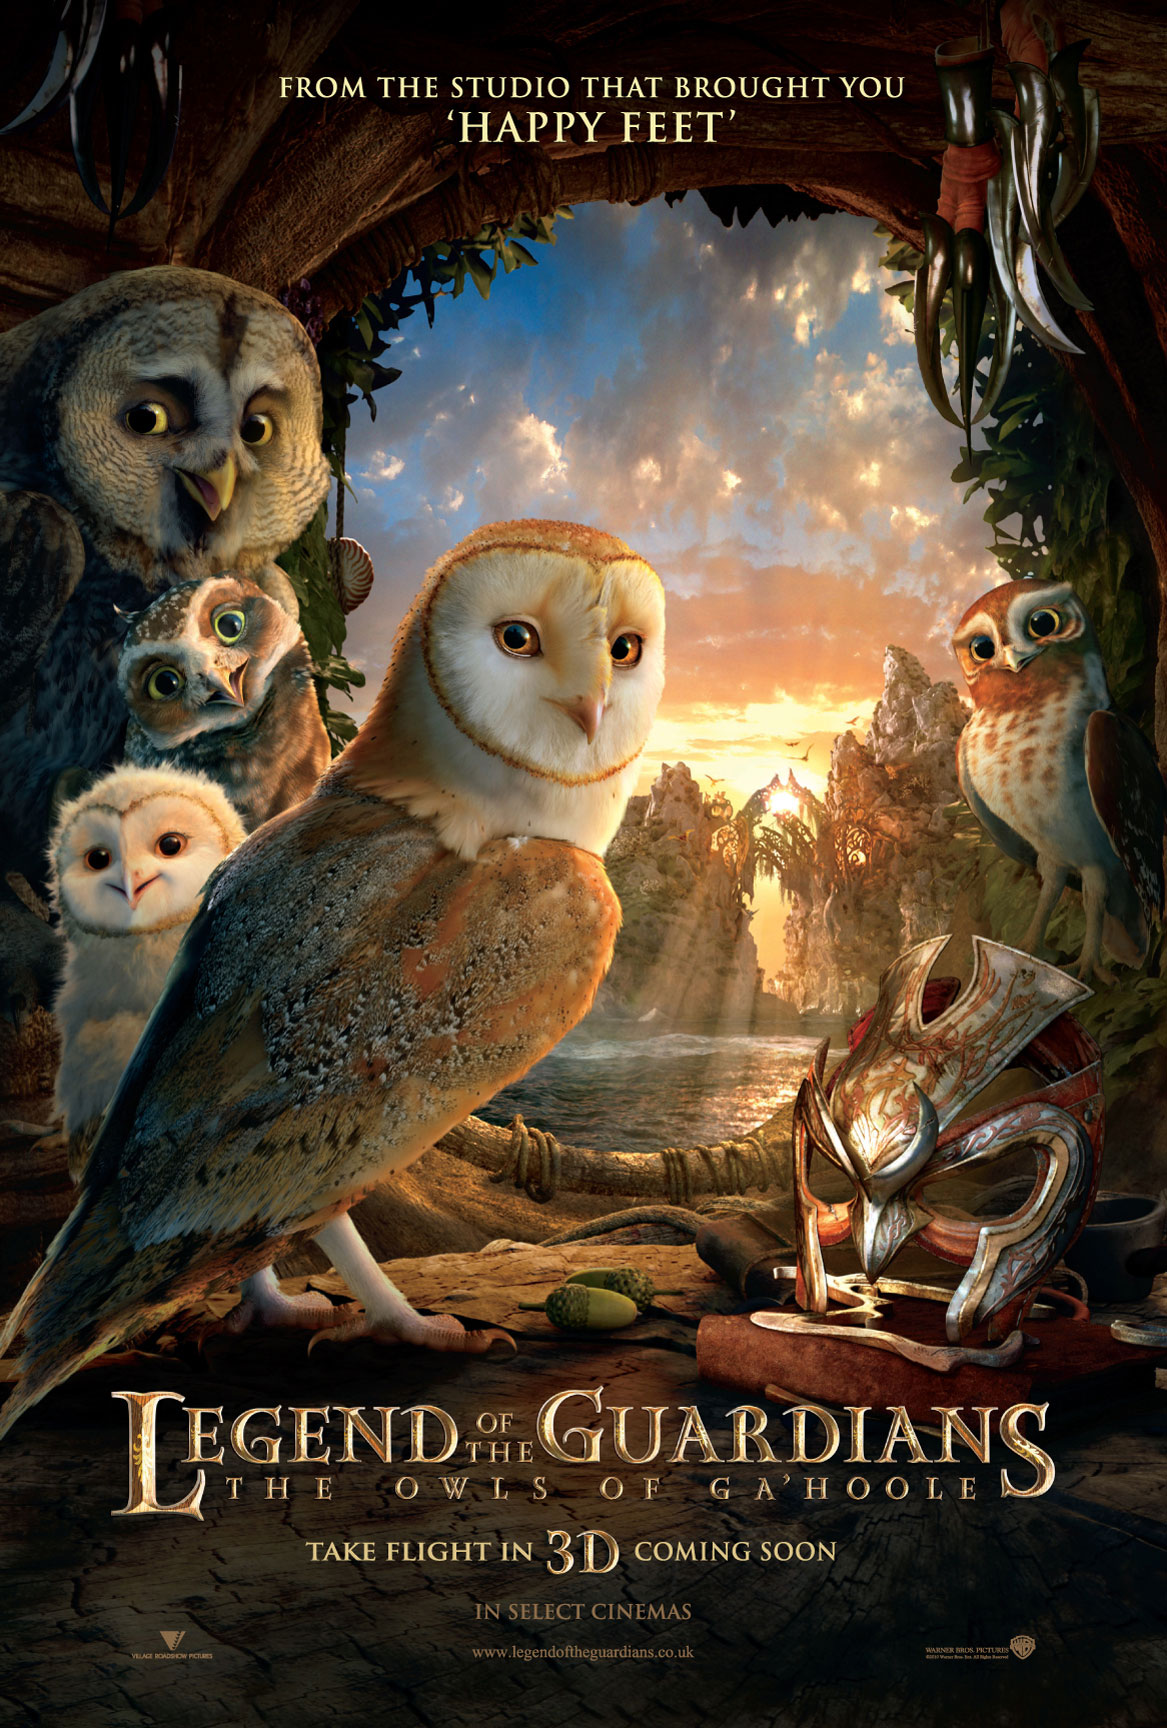 The Guardians of the Vulnerable: A Non-Expert Expression of How Much I Loved That Owl Movie